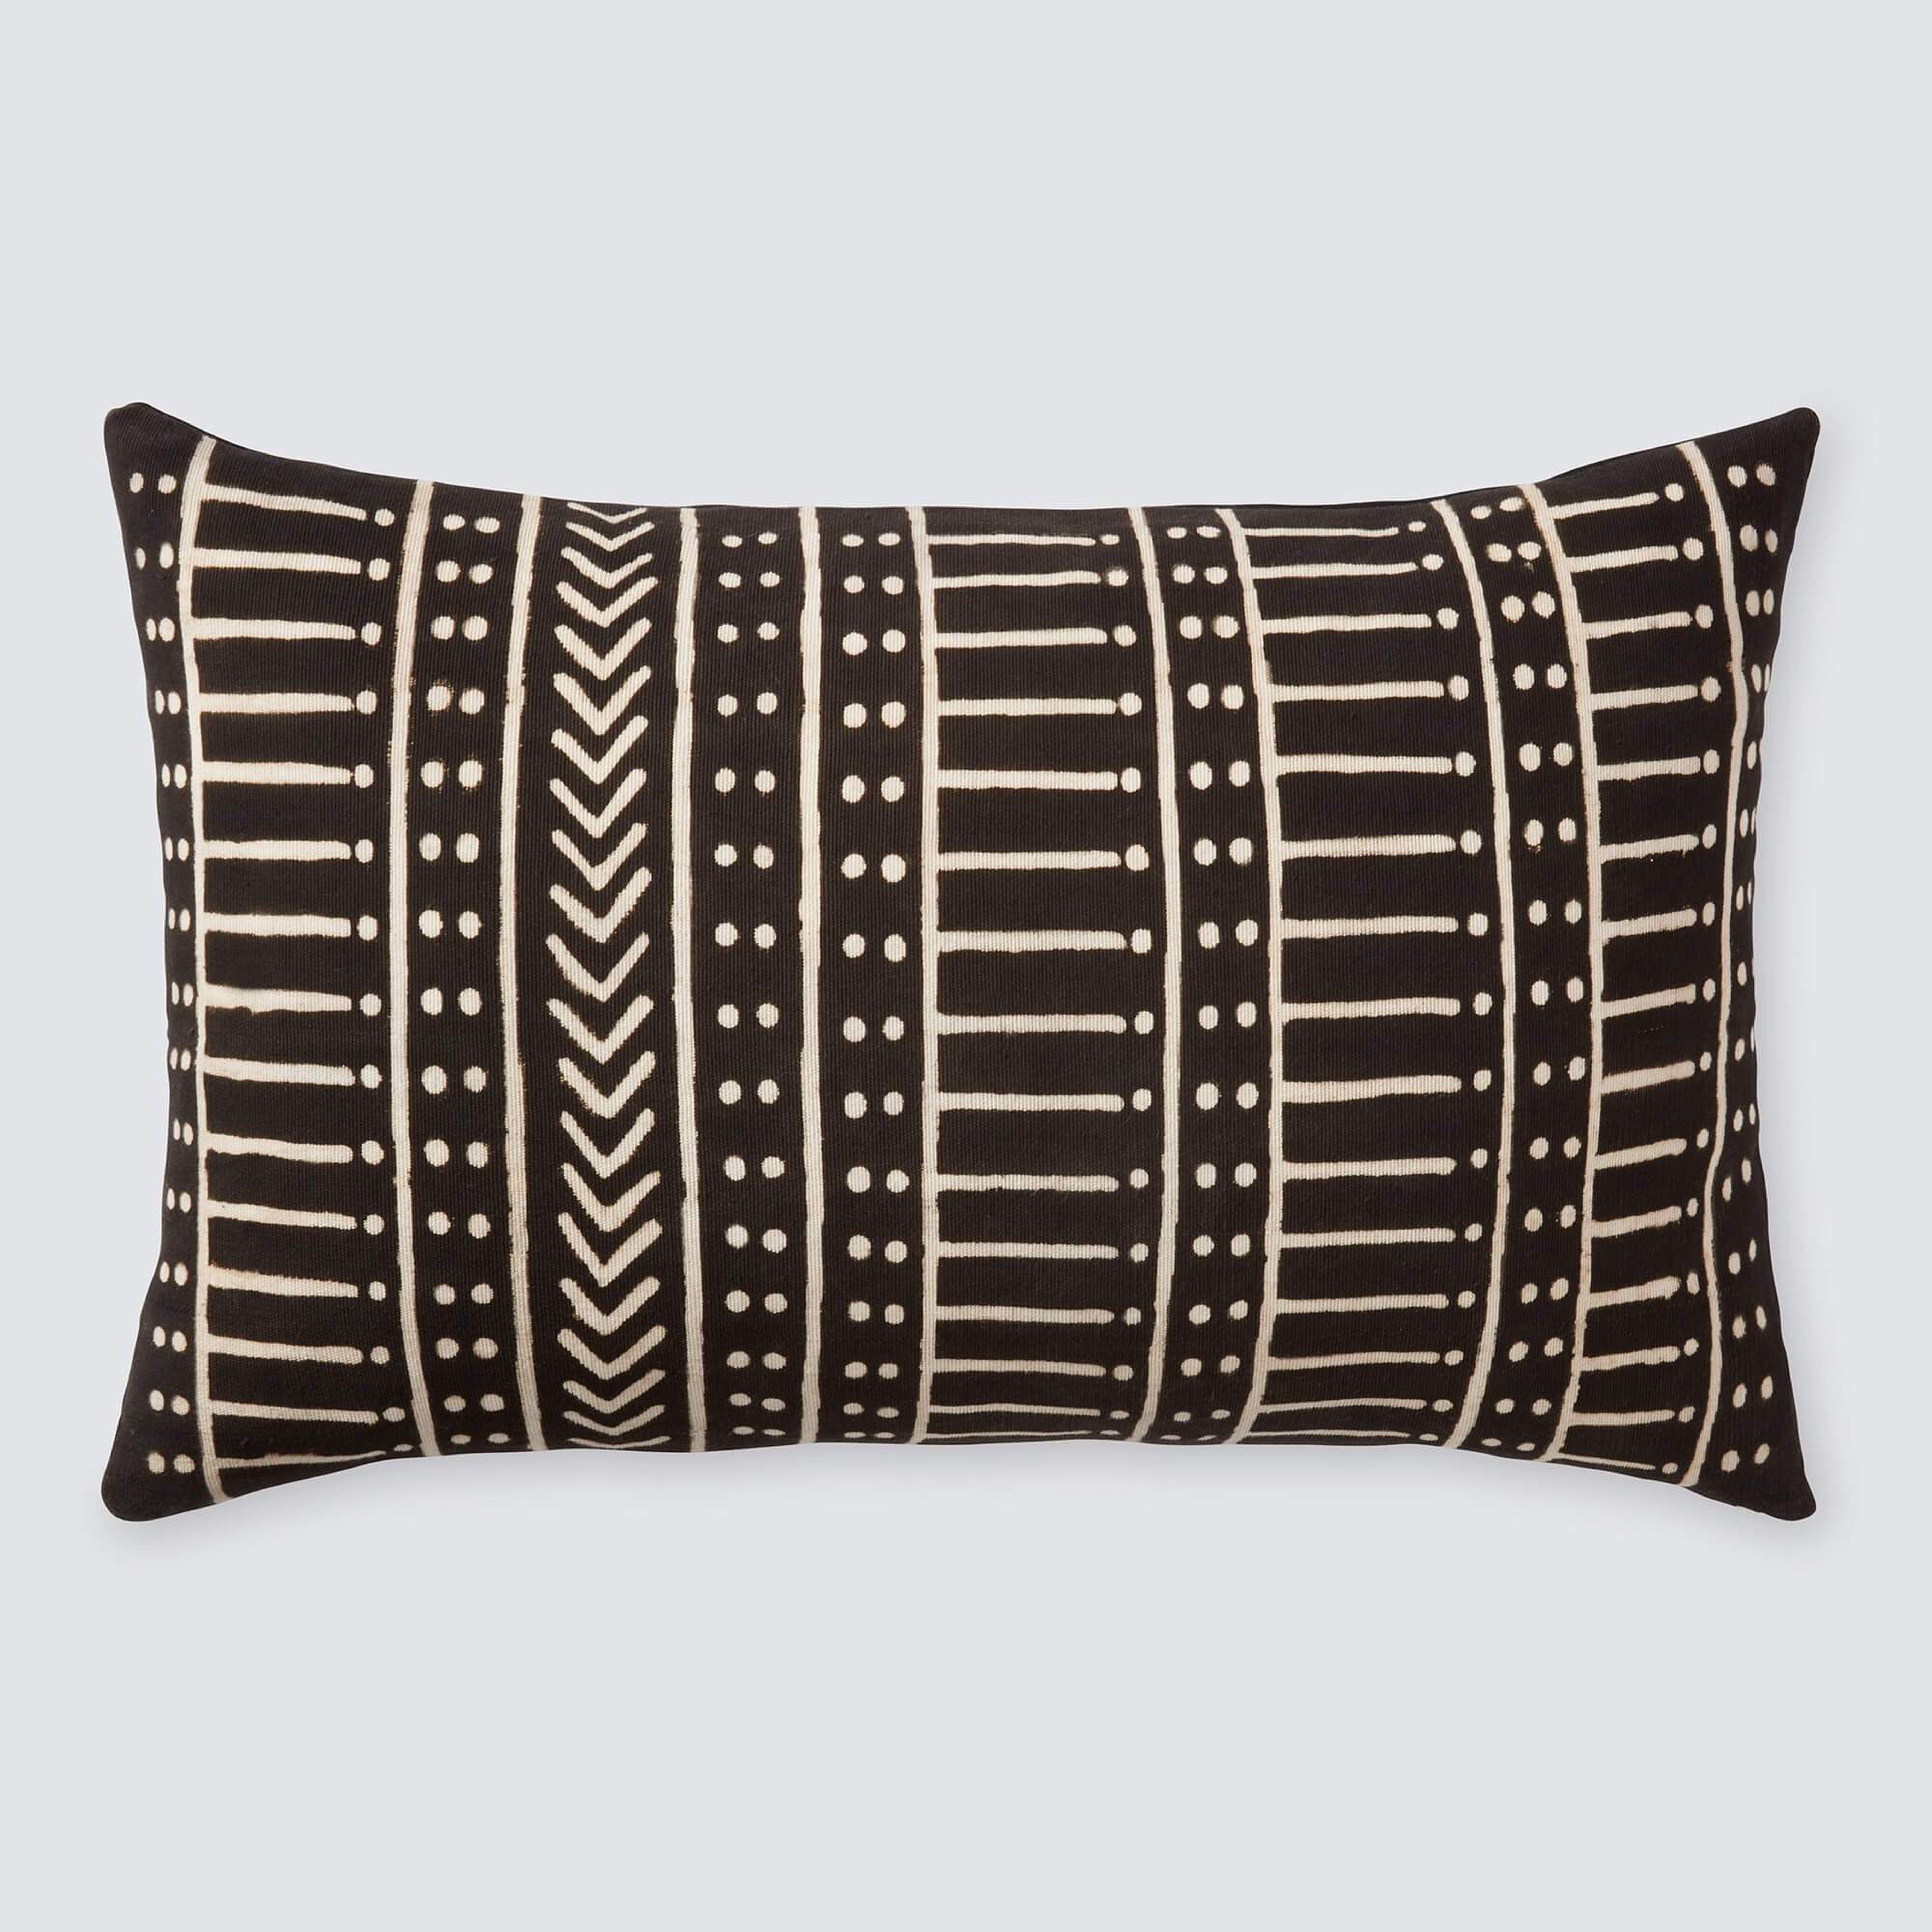 Minuit Mud Cloth Lumbar Pillow By The Citizenry - The Citizenry